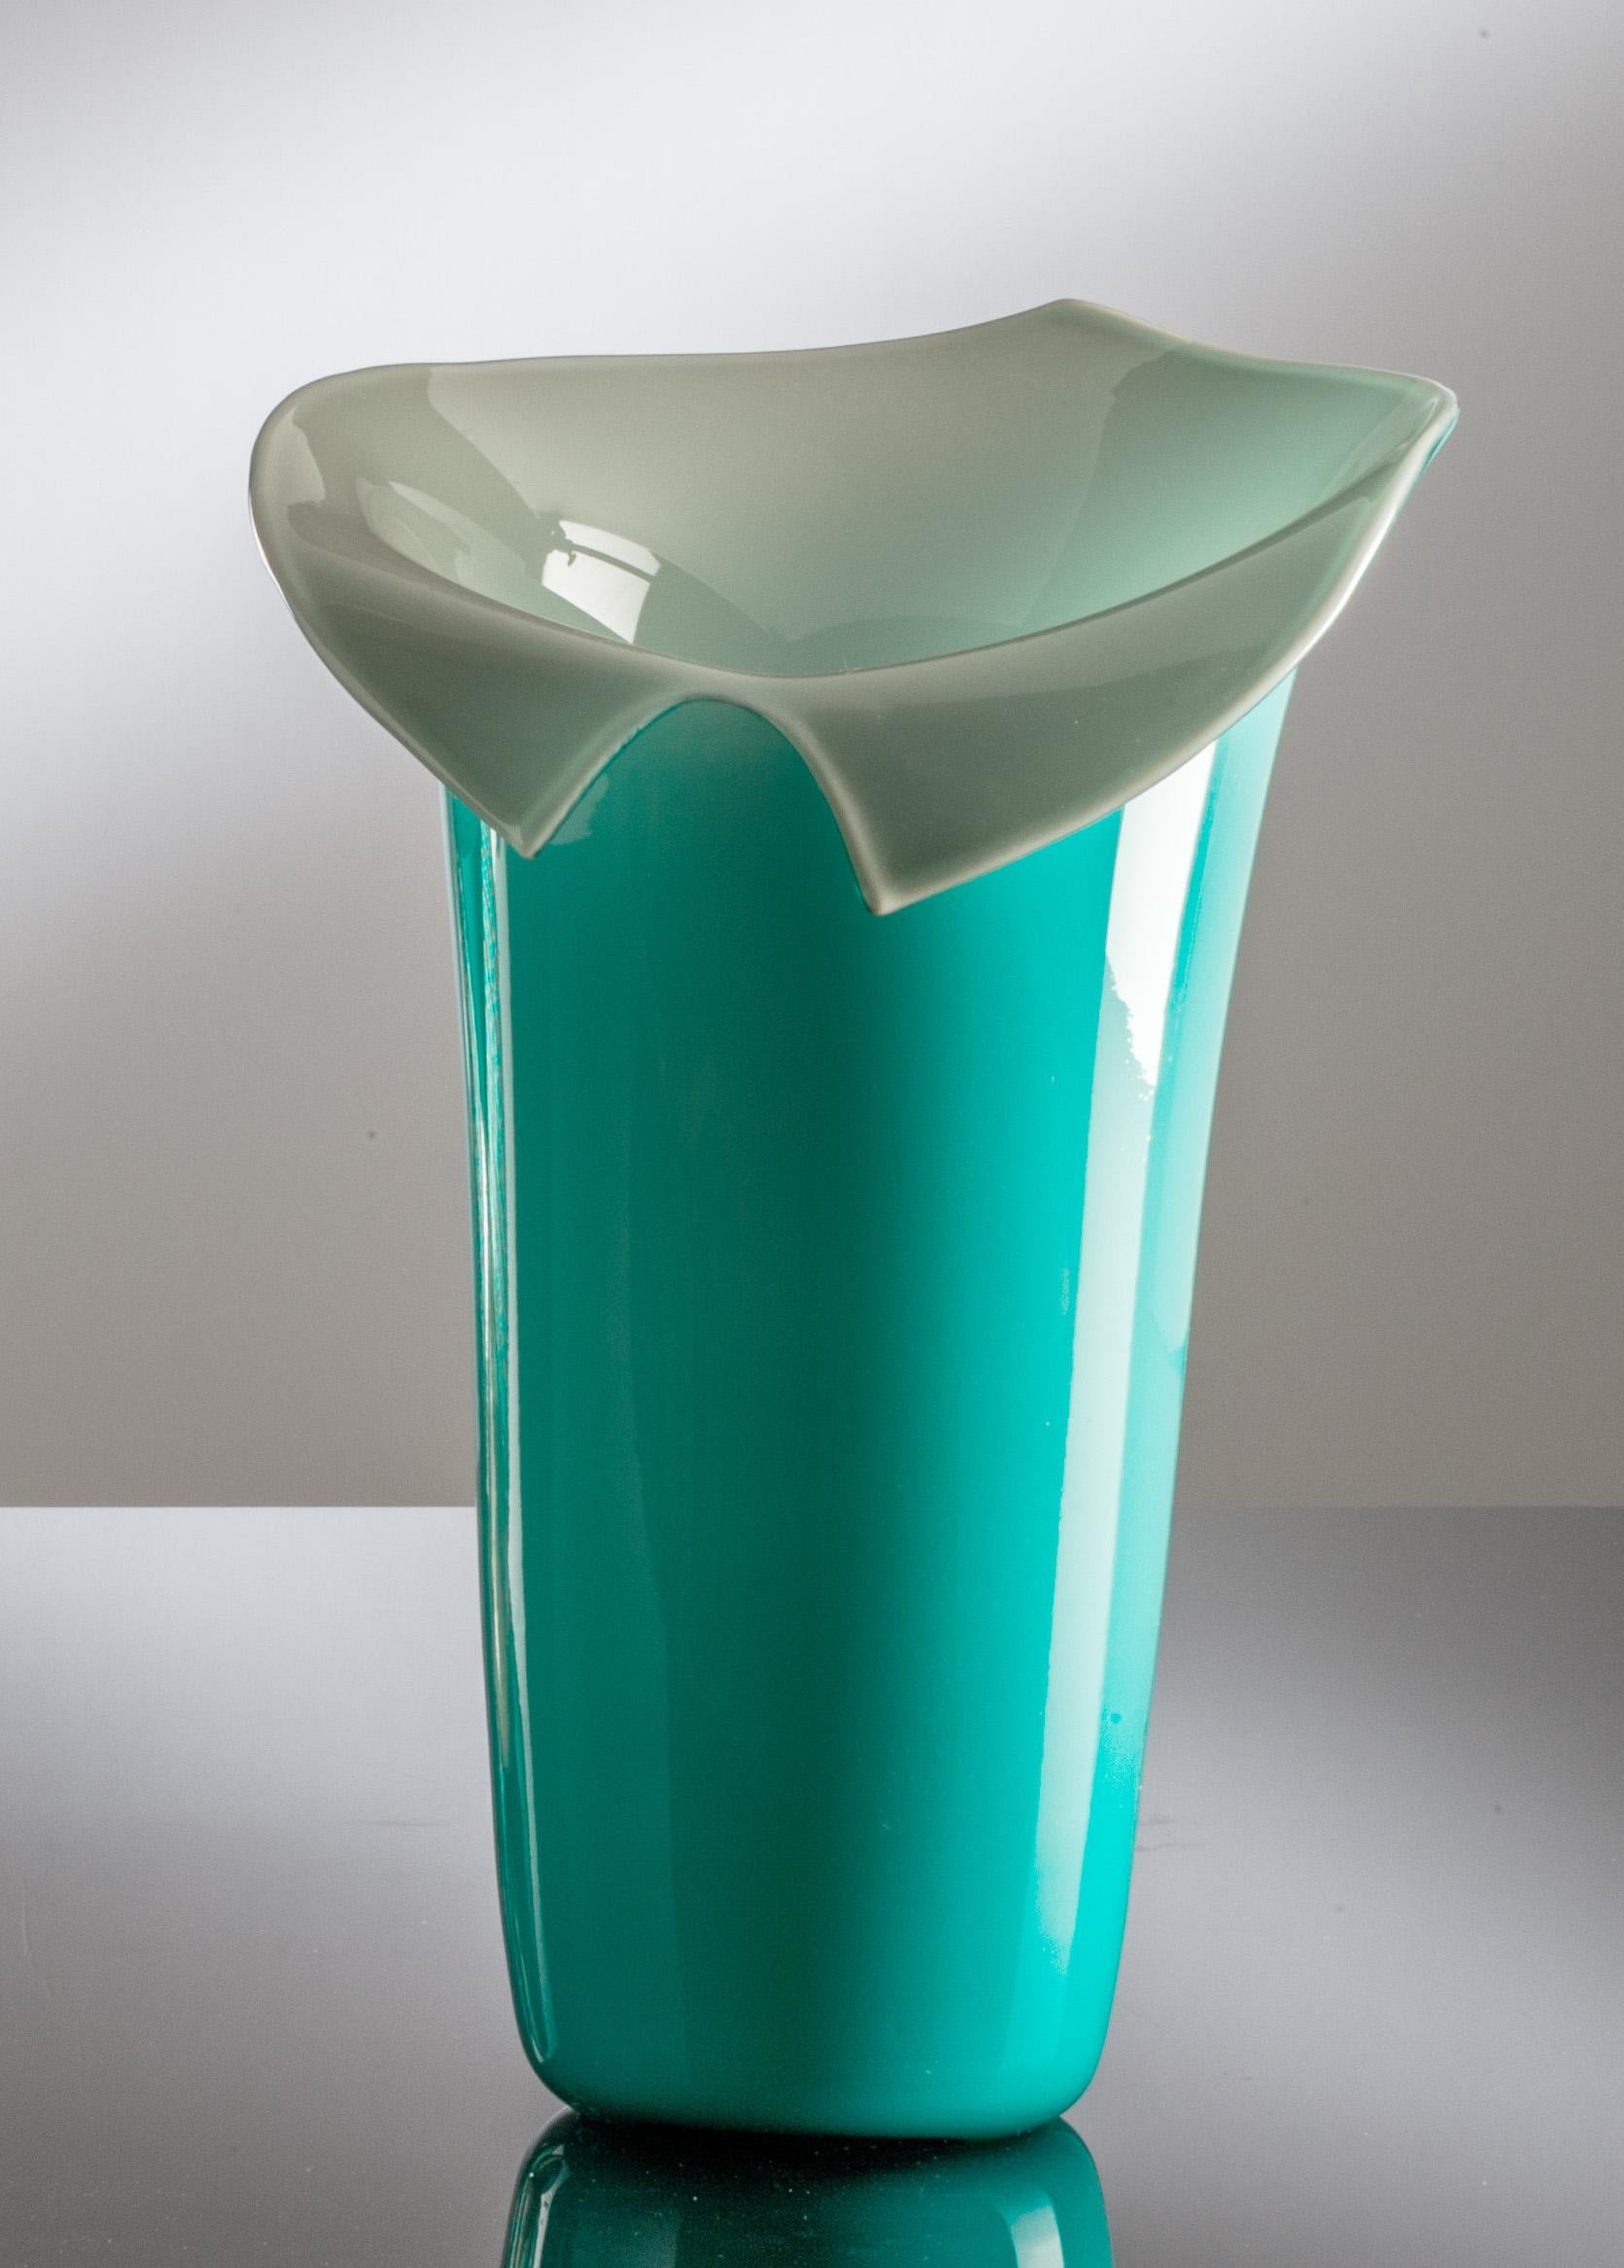 Calla glass vase, designed and manufactured by Venini, is a limited edition of 99 art pieces in mint green / grey color. Indoor use only.

Dimensions: Ø 22 cm, H 30 cm.